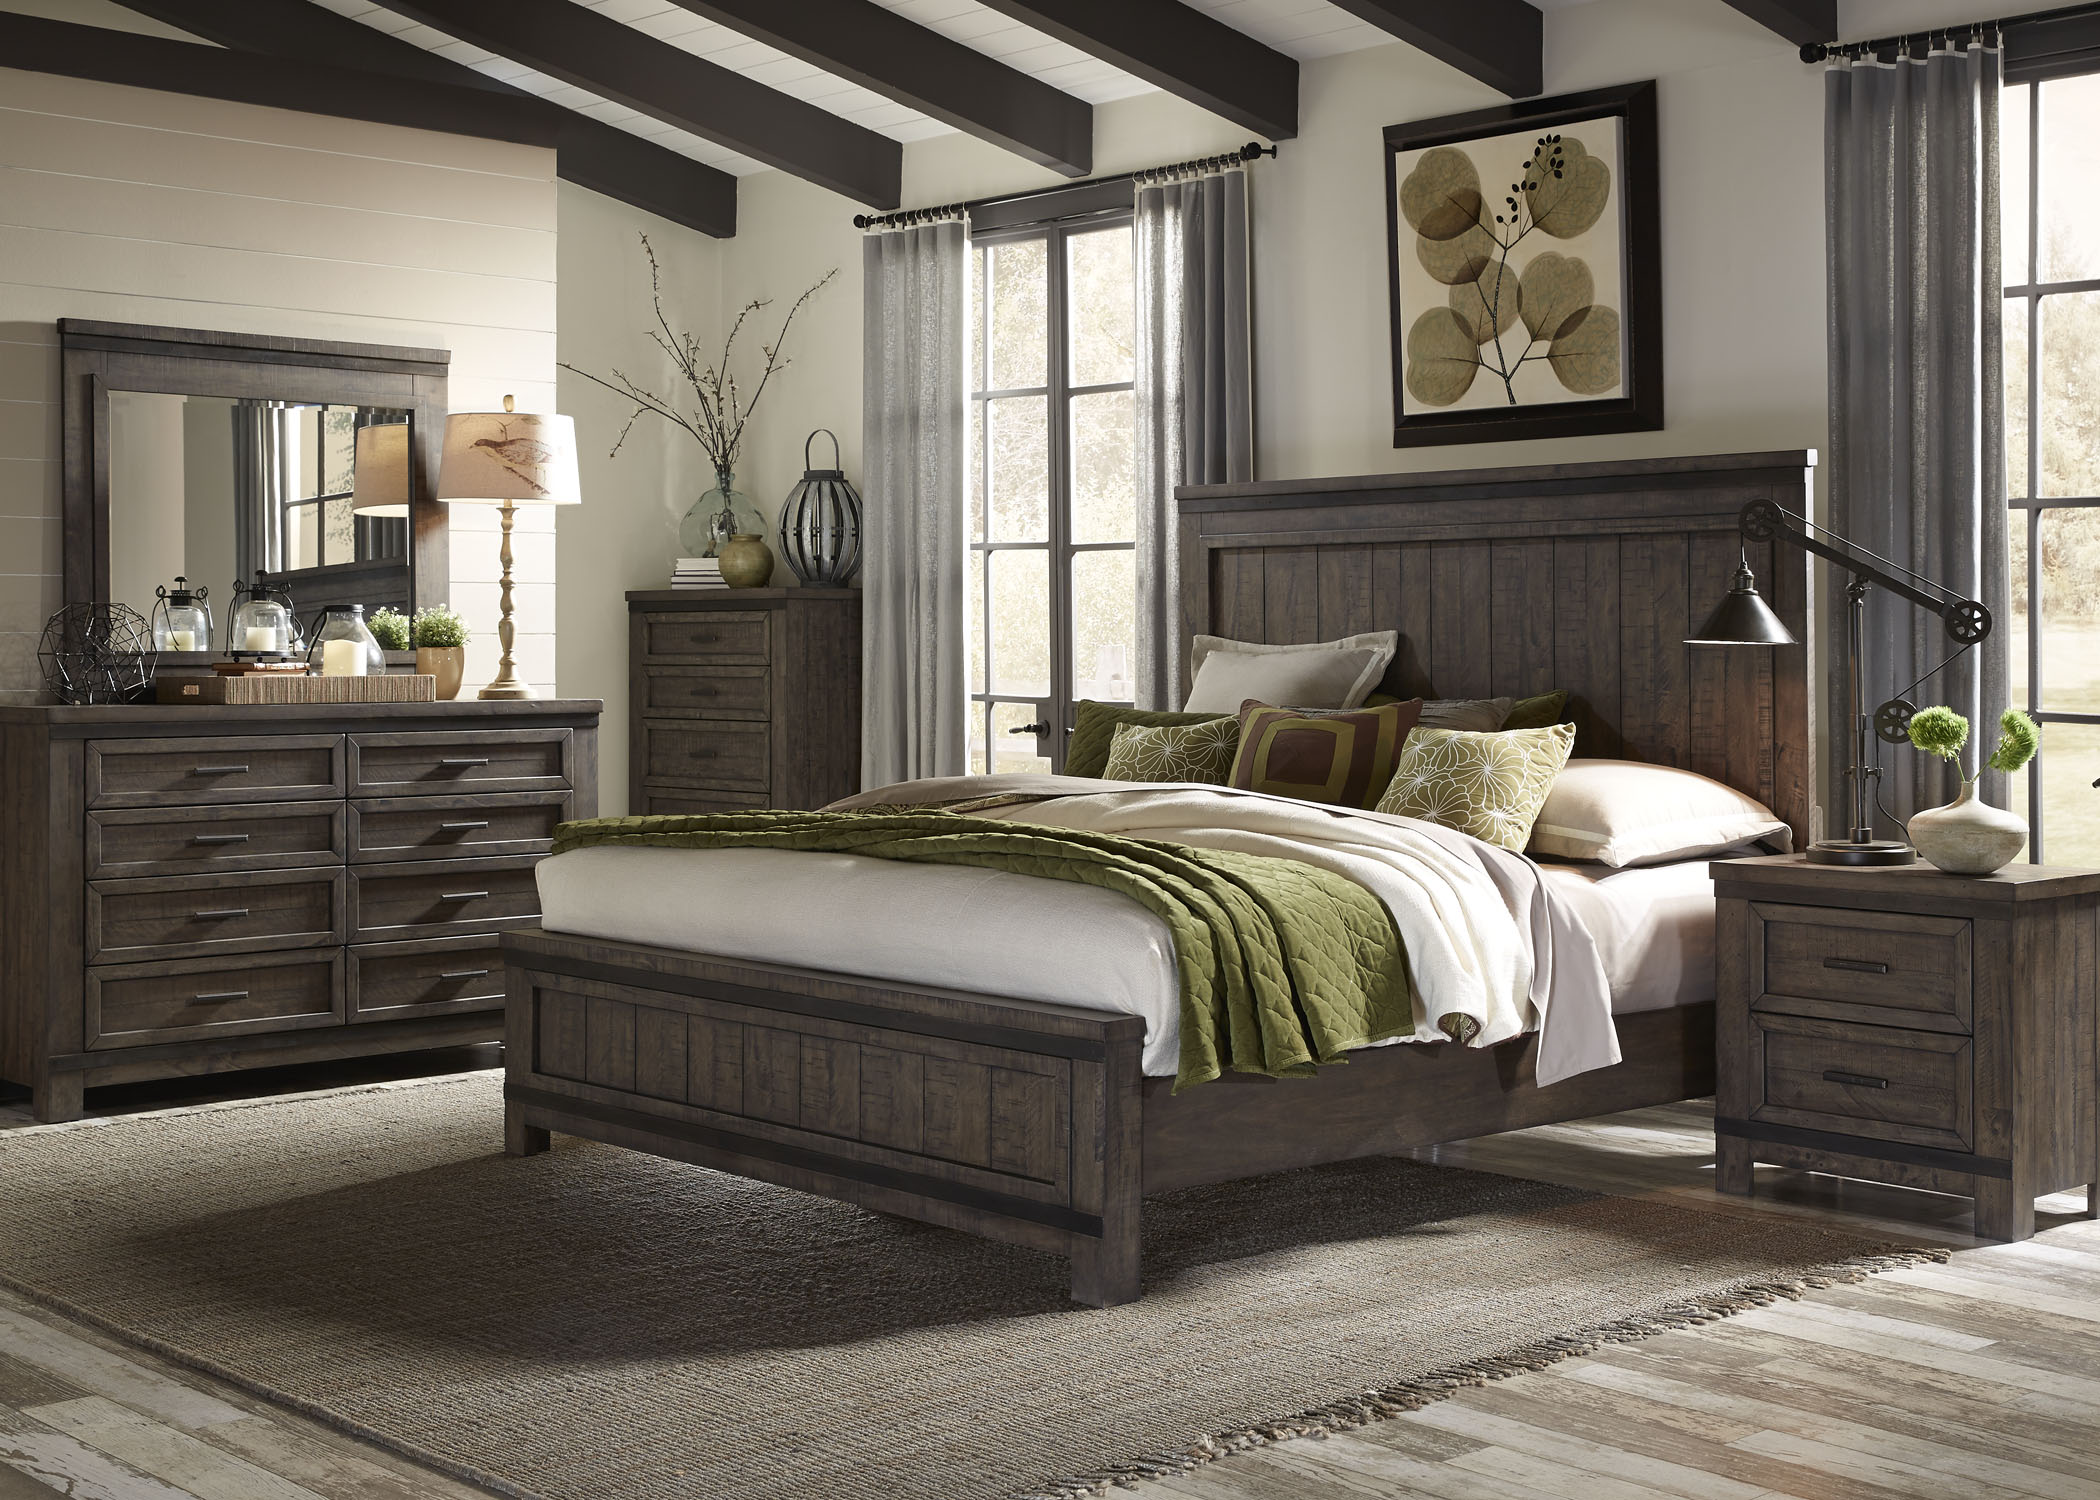 Liberty Furniture Thornwood Hills Bedroom King Panel Bed, Dresser, Mirror, Chest, and Night Stand Collection